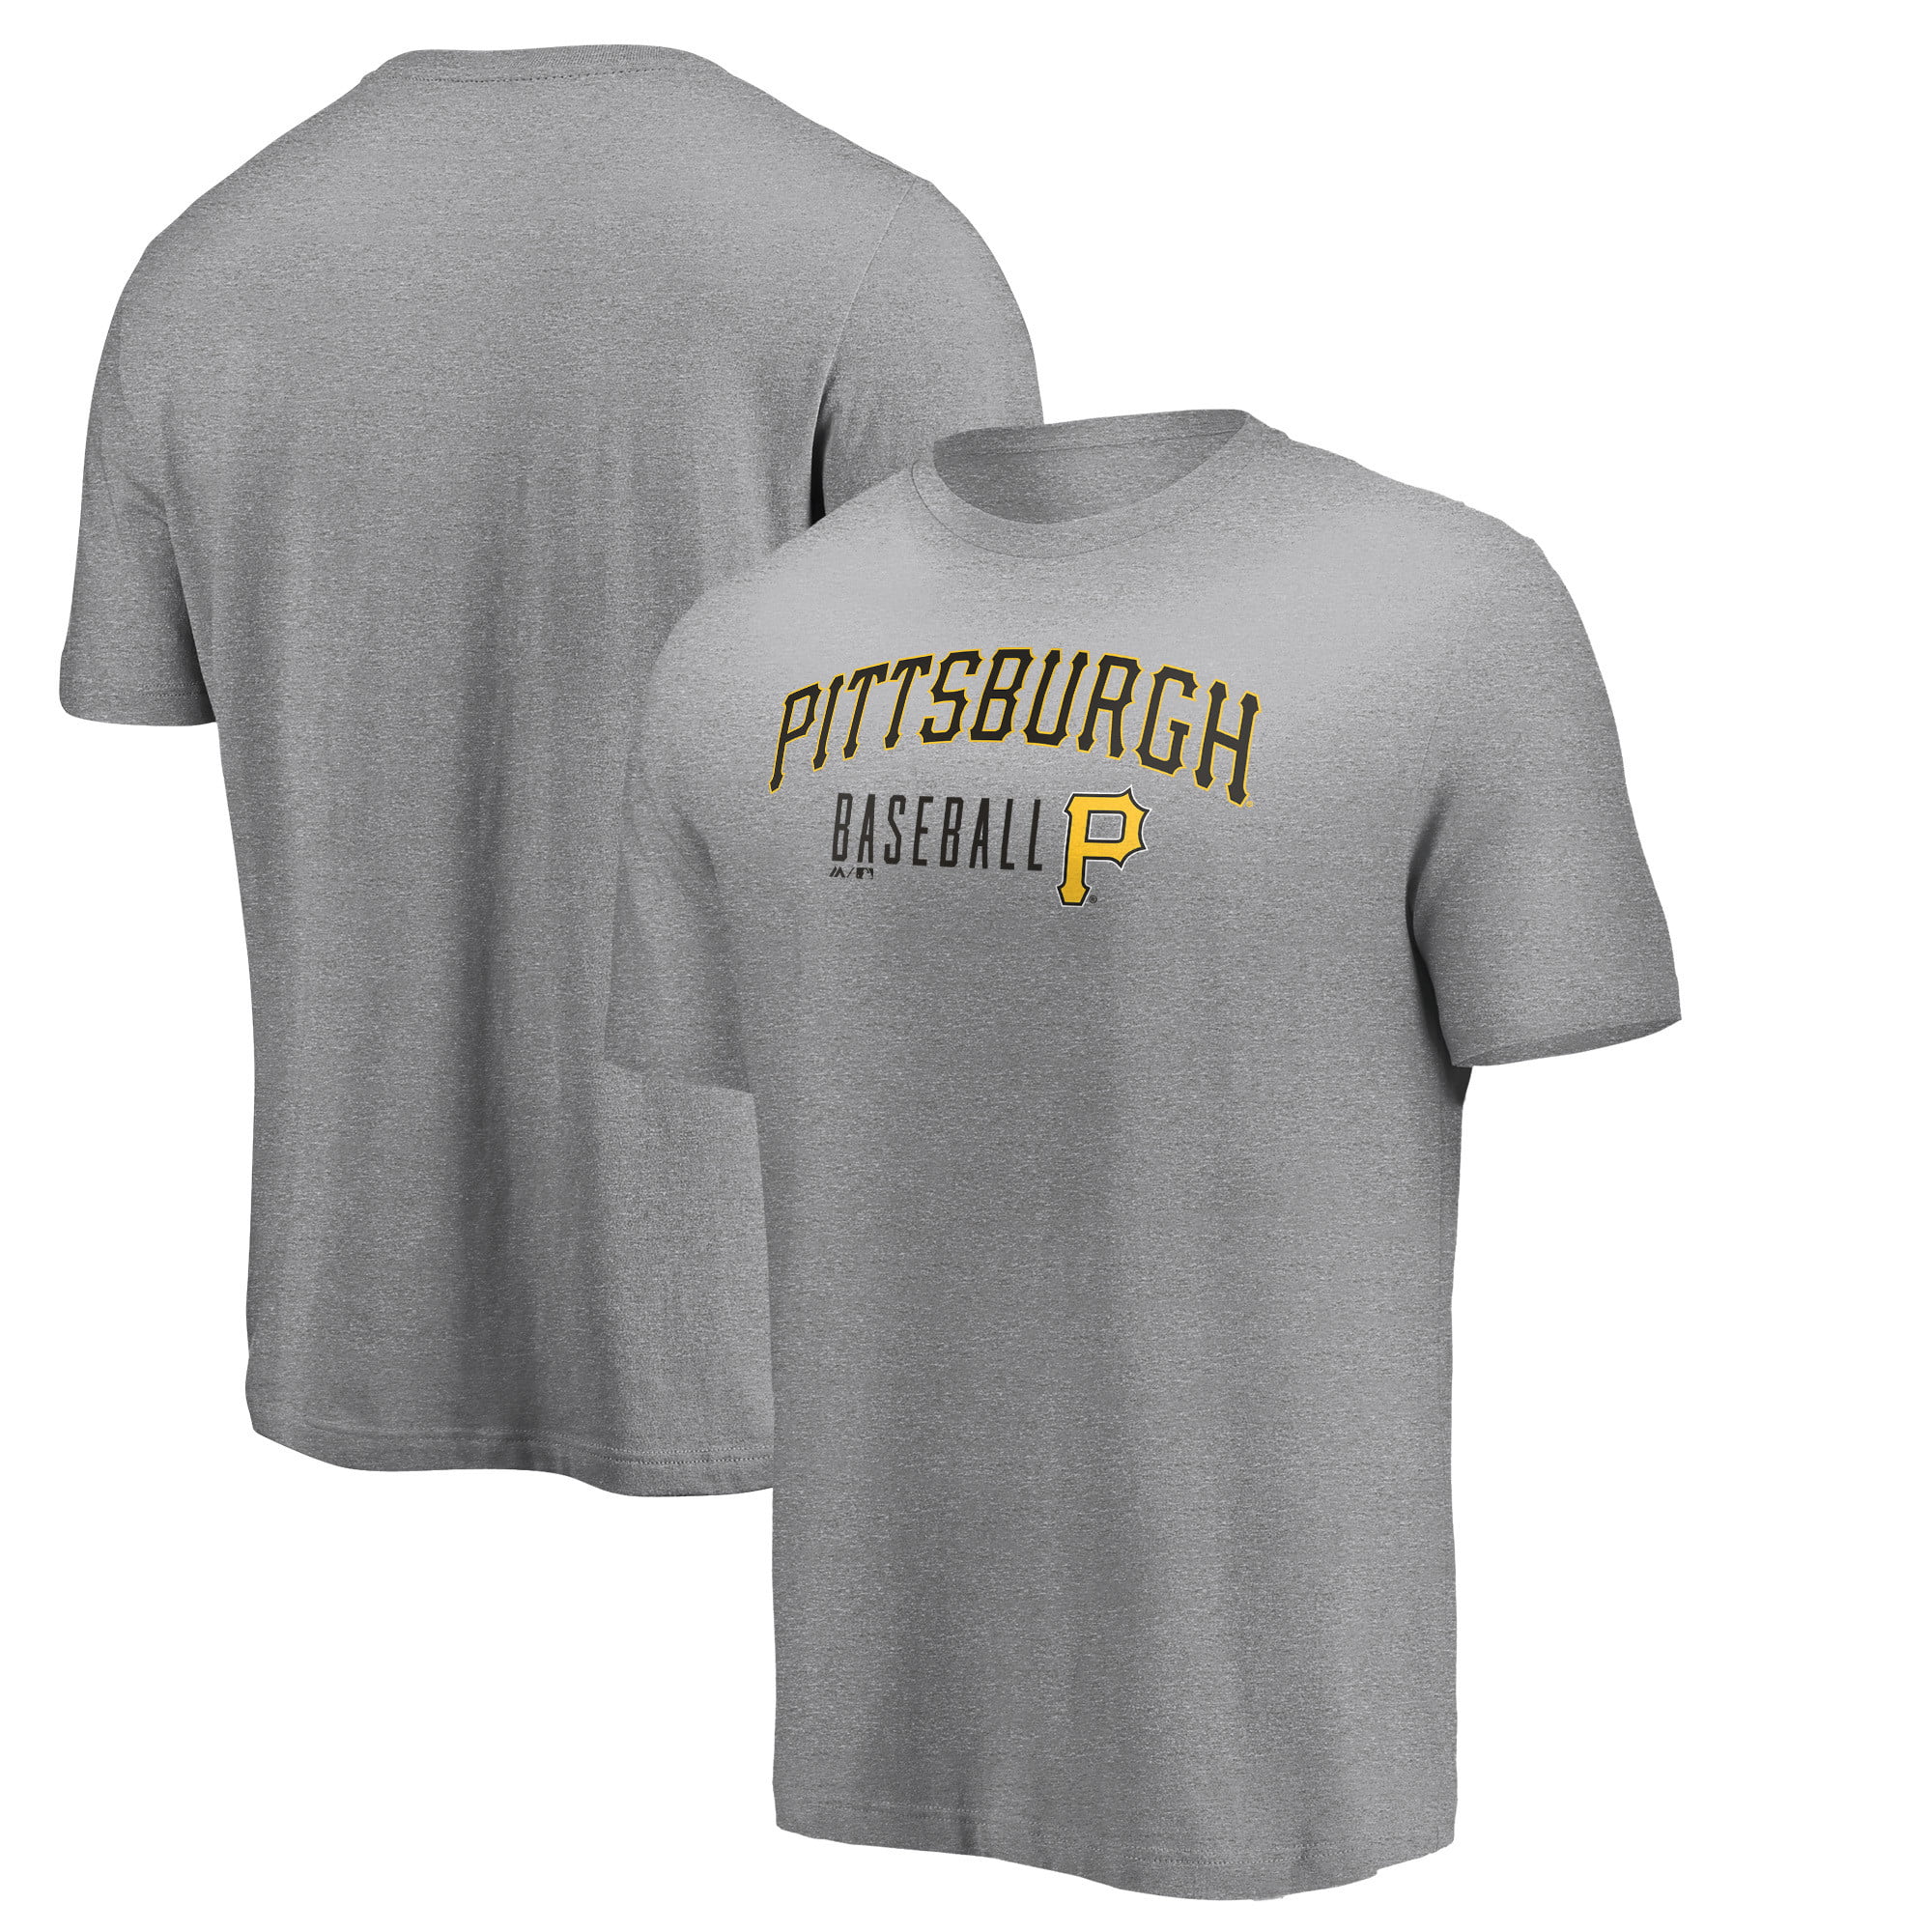 Men's Majestic Heathered Gray Pittsburgh Pirates Open Opportunity T-Shirt 